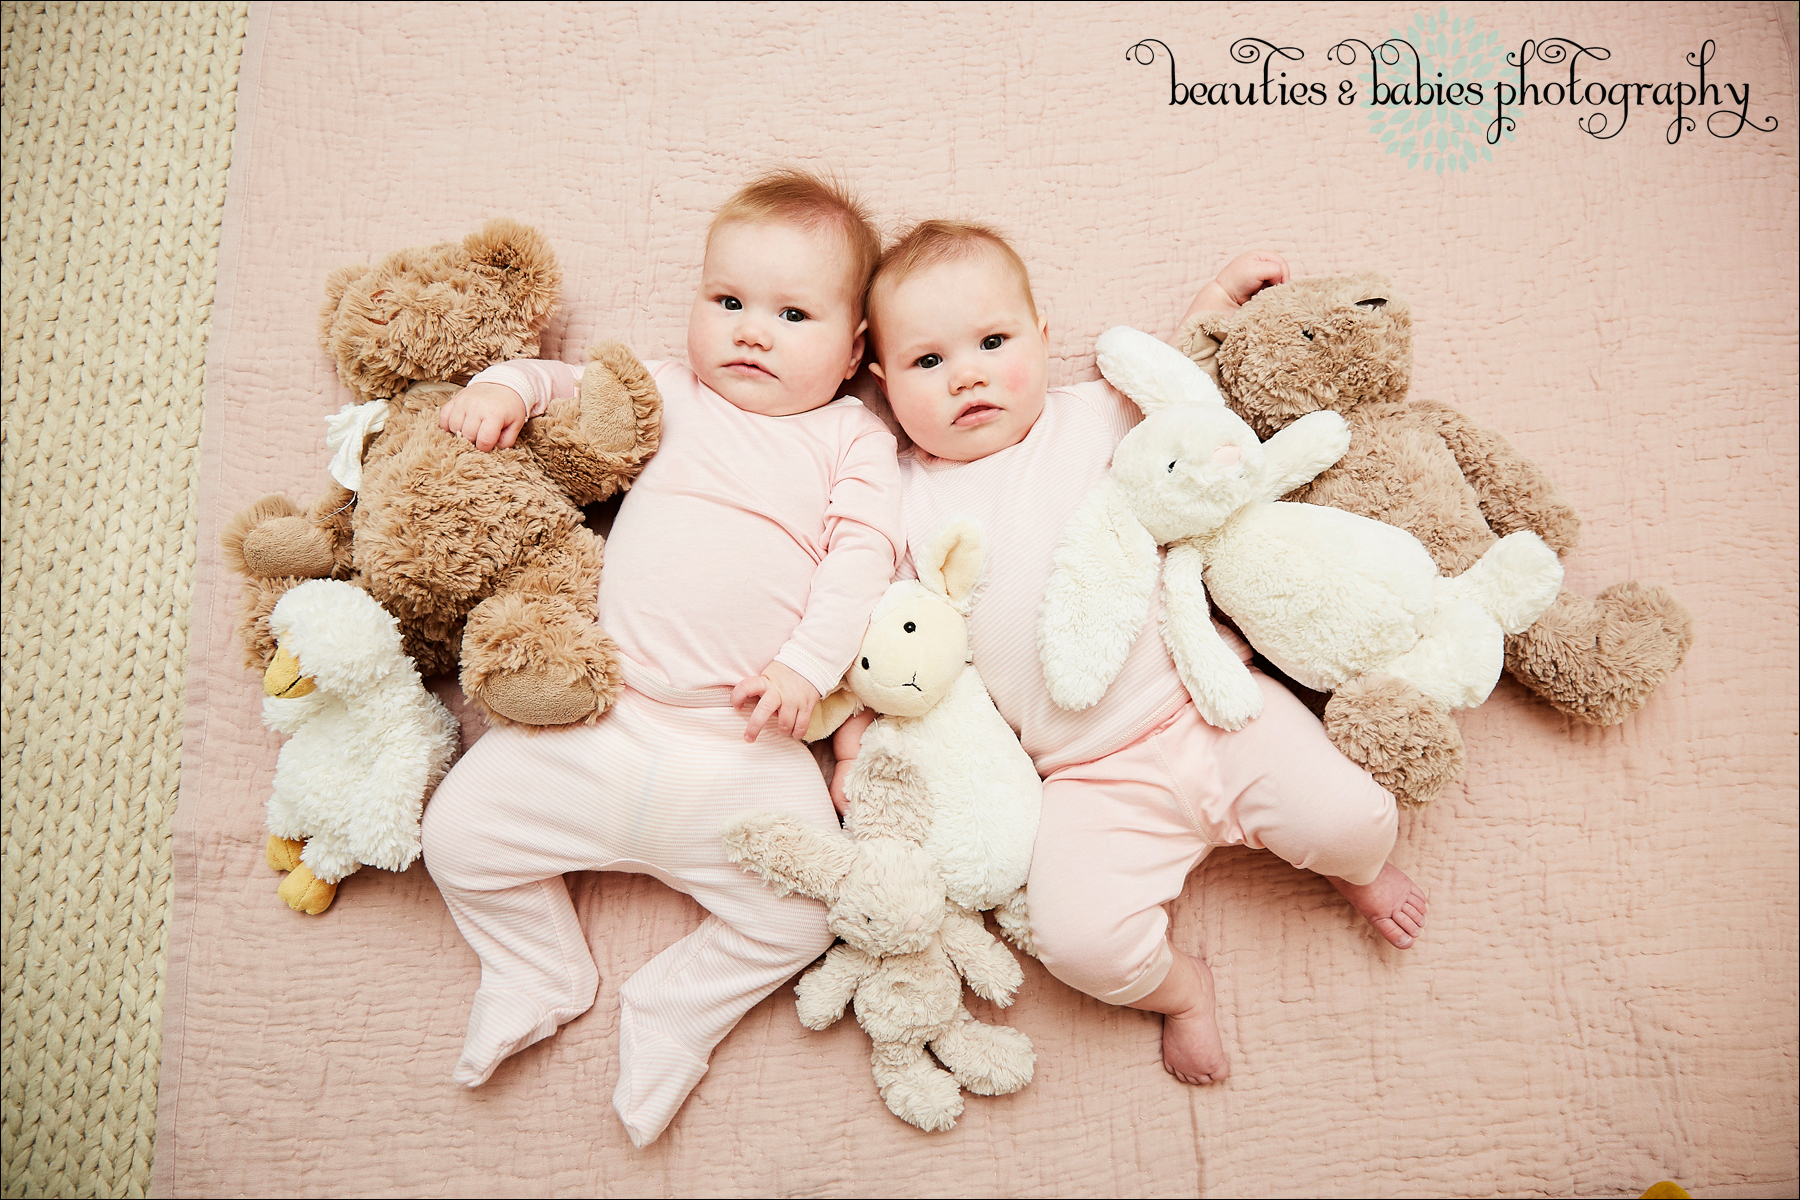 Baby clothing company photographer Los Angeles commercial photography baby and kids clothes